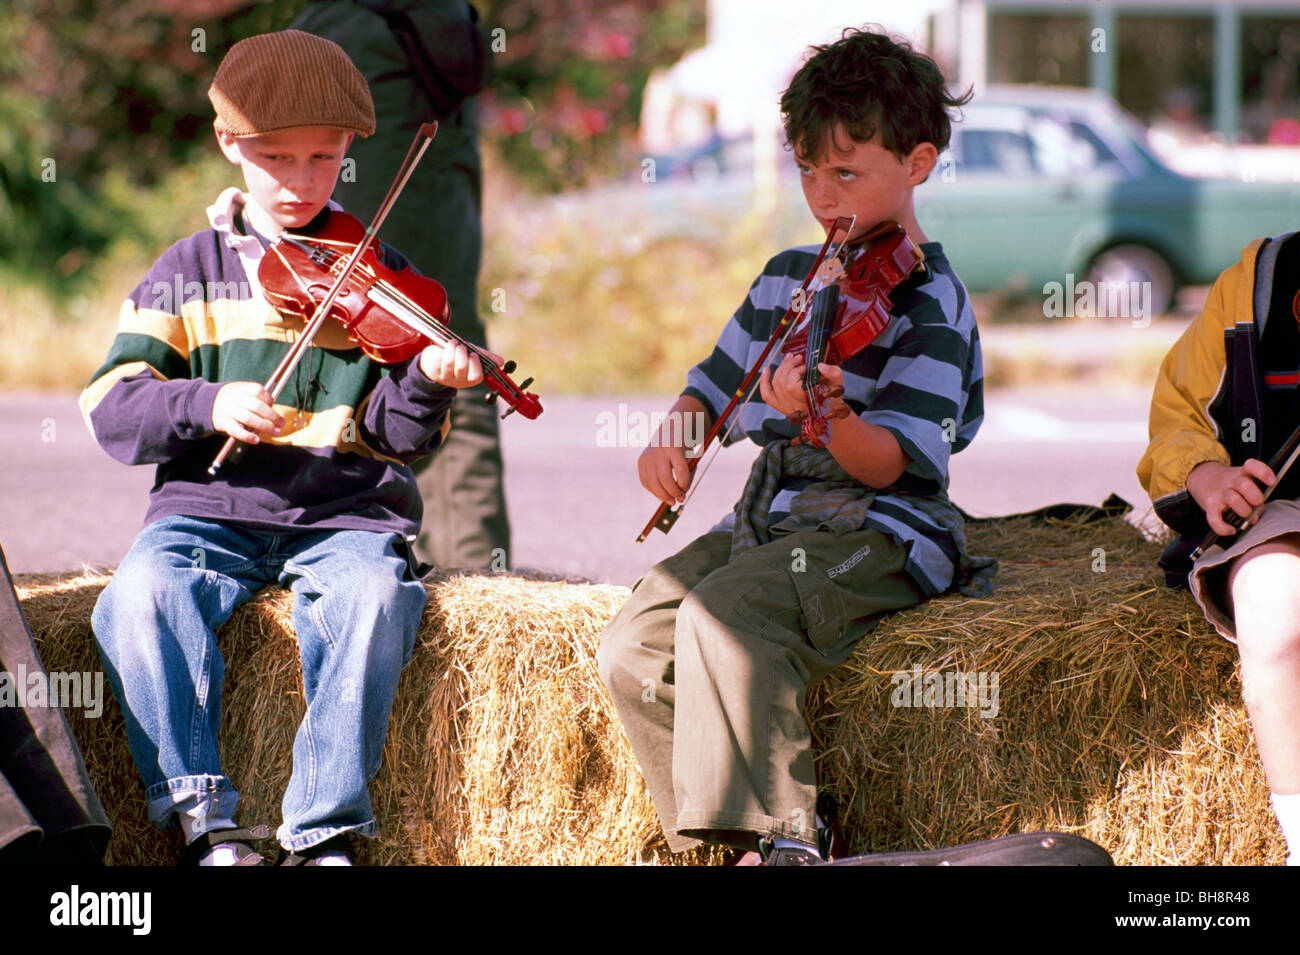 young-boys-playing-violin-fiddle-music-c